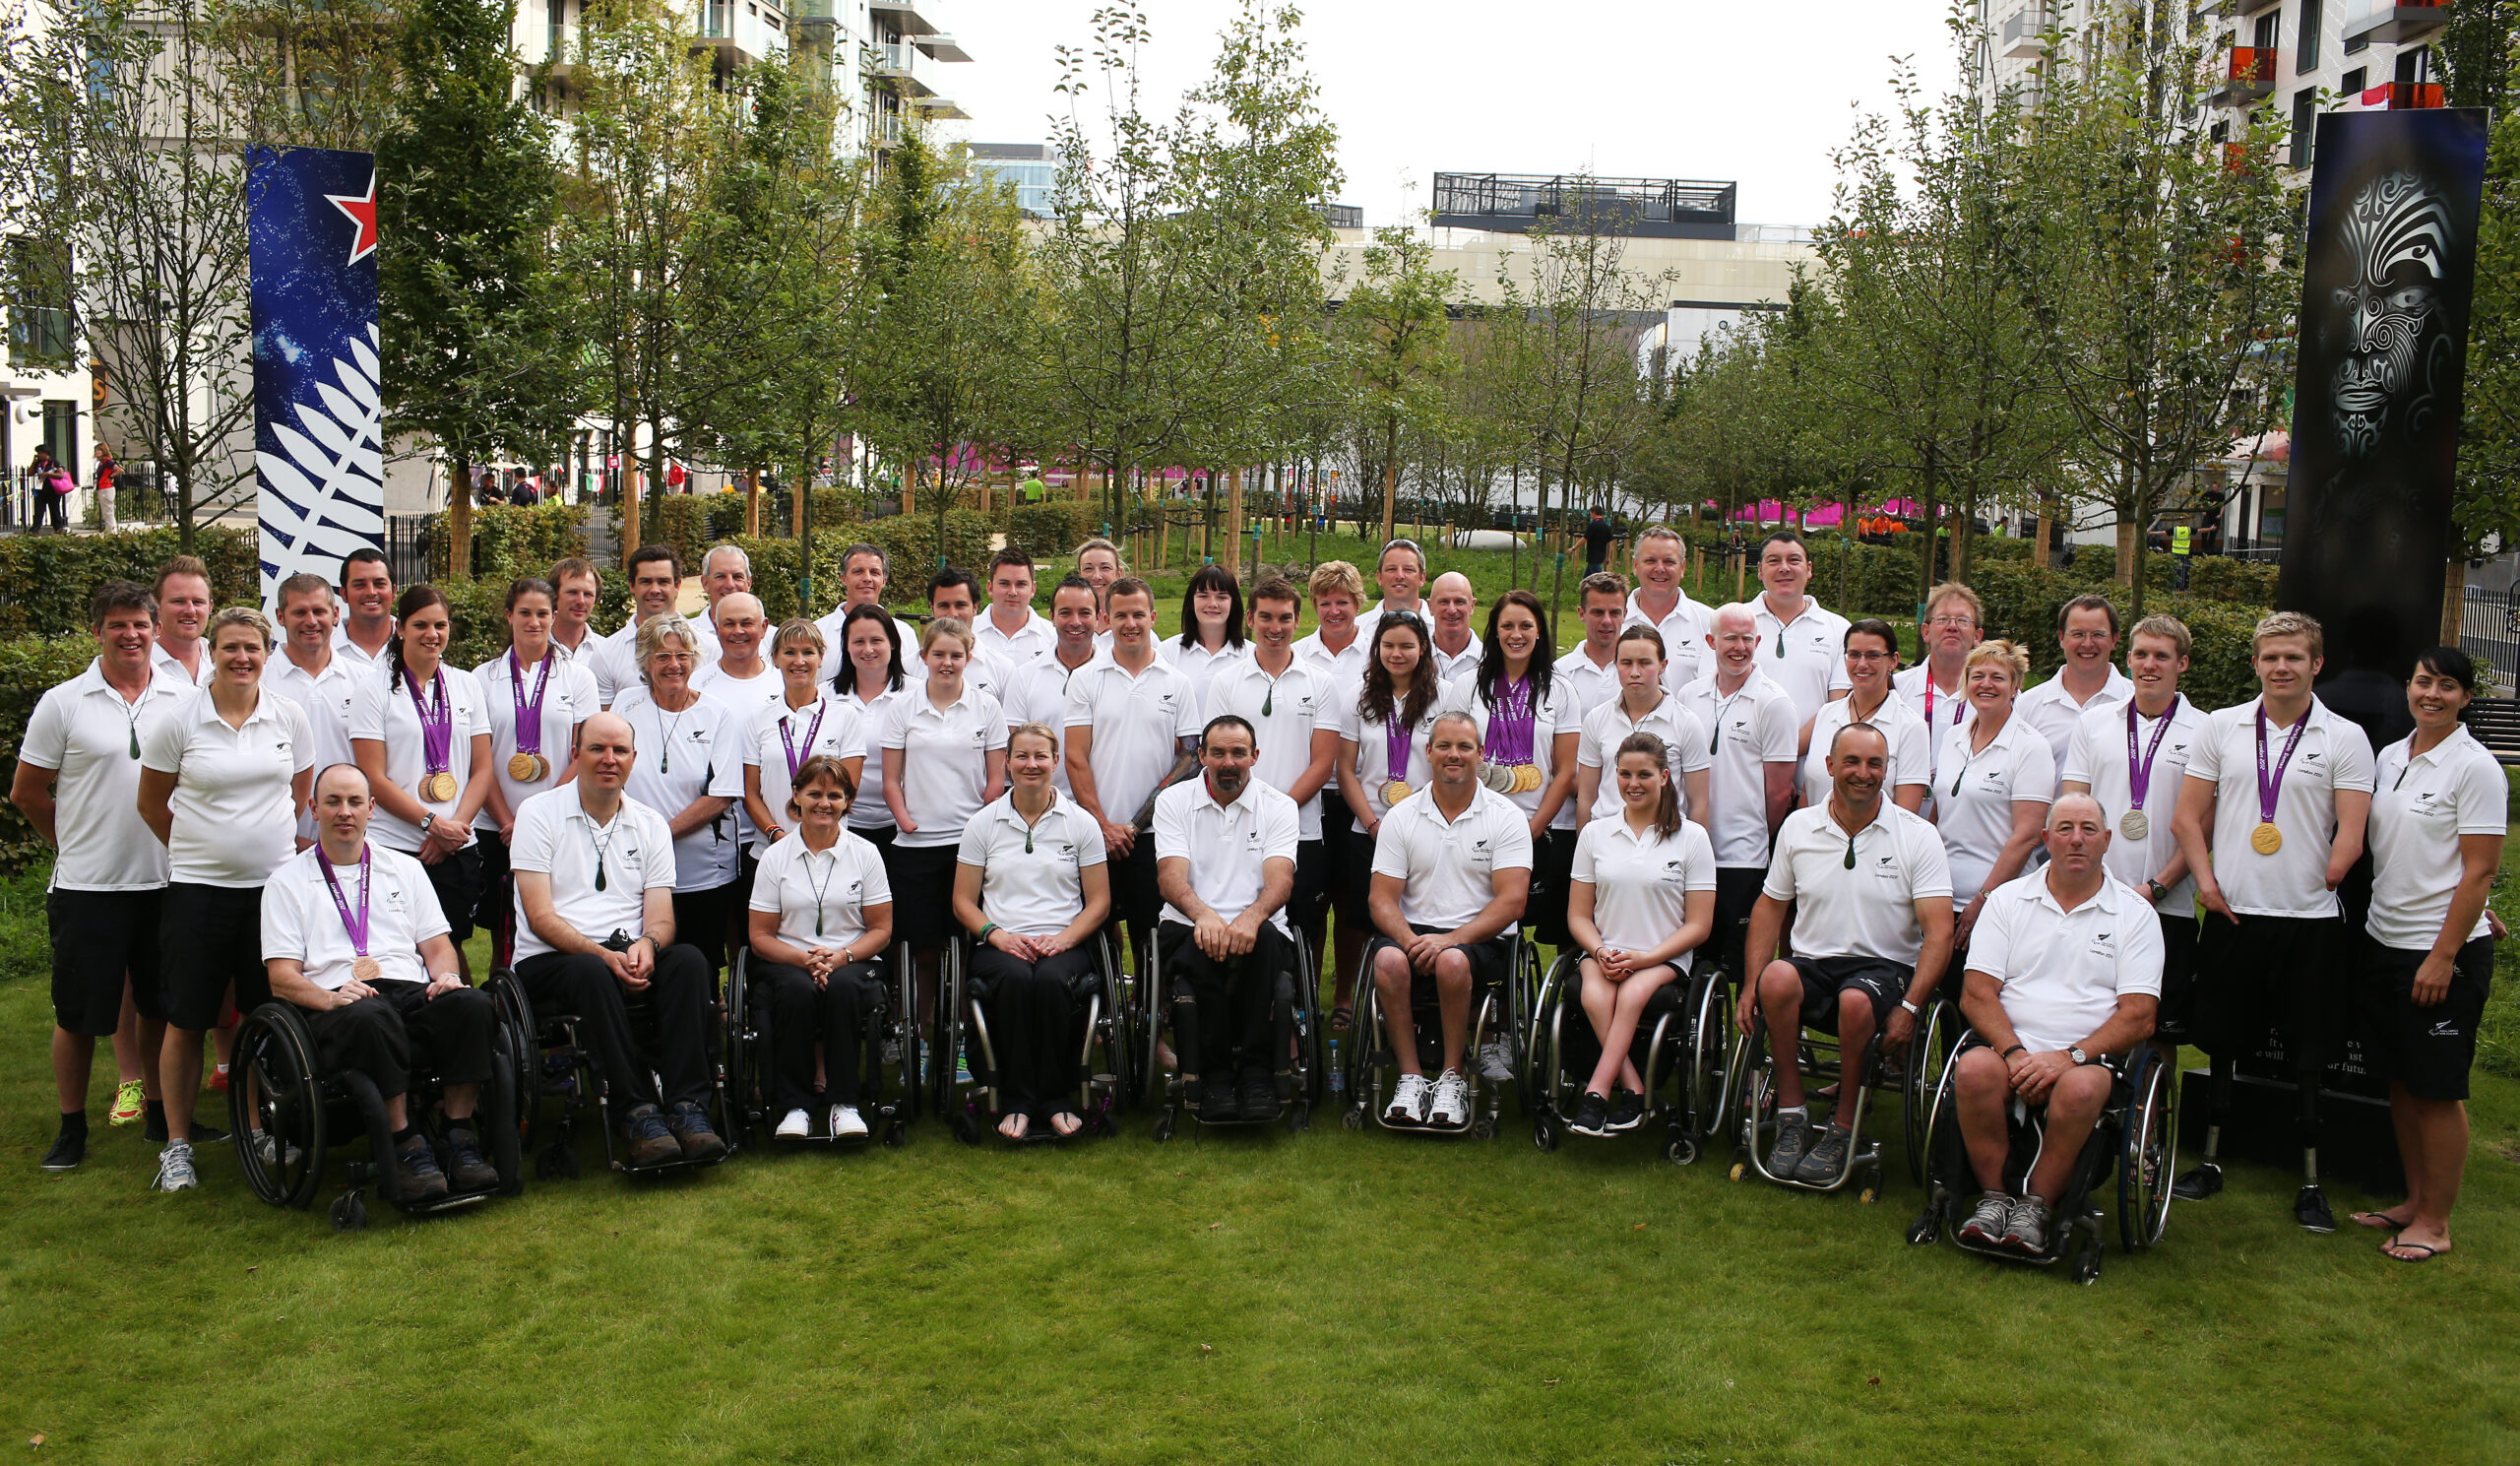 Group portrait of the London 2012 Paralympic Team. around 40 people wear white polo shorts in a grassy space with a flag behind. the front row are in wheelchairs.